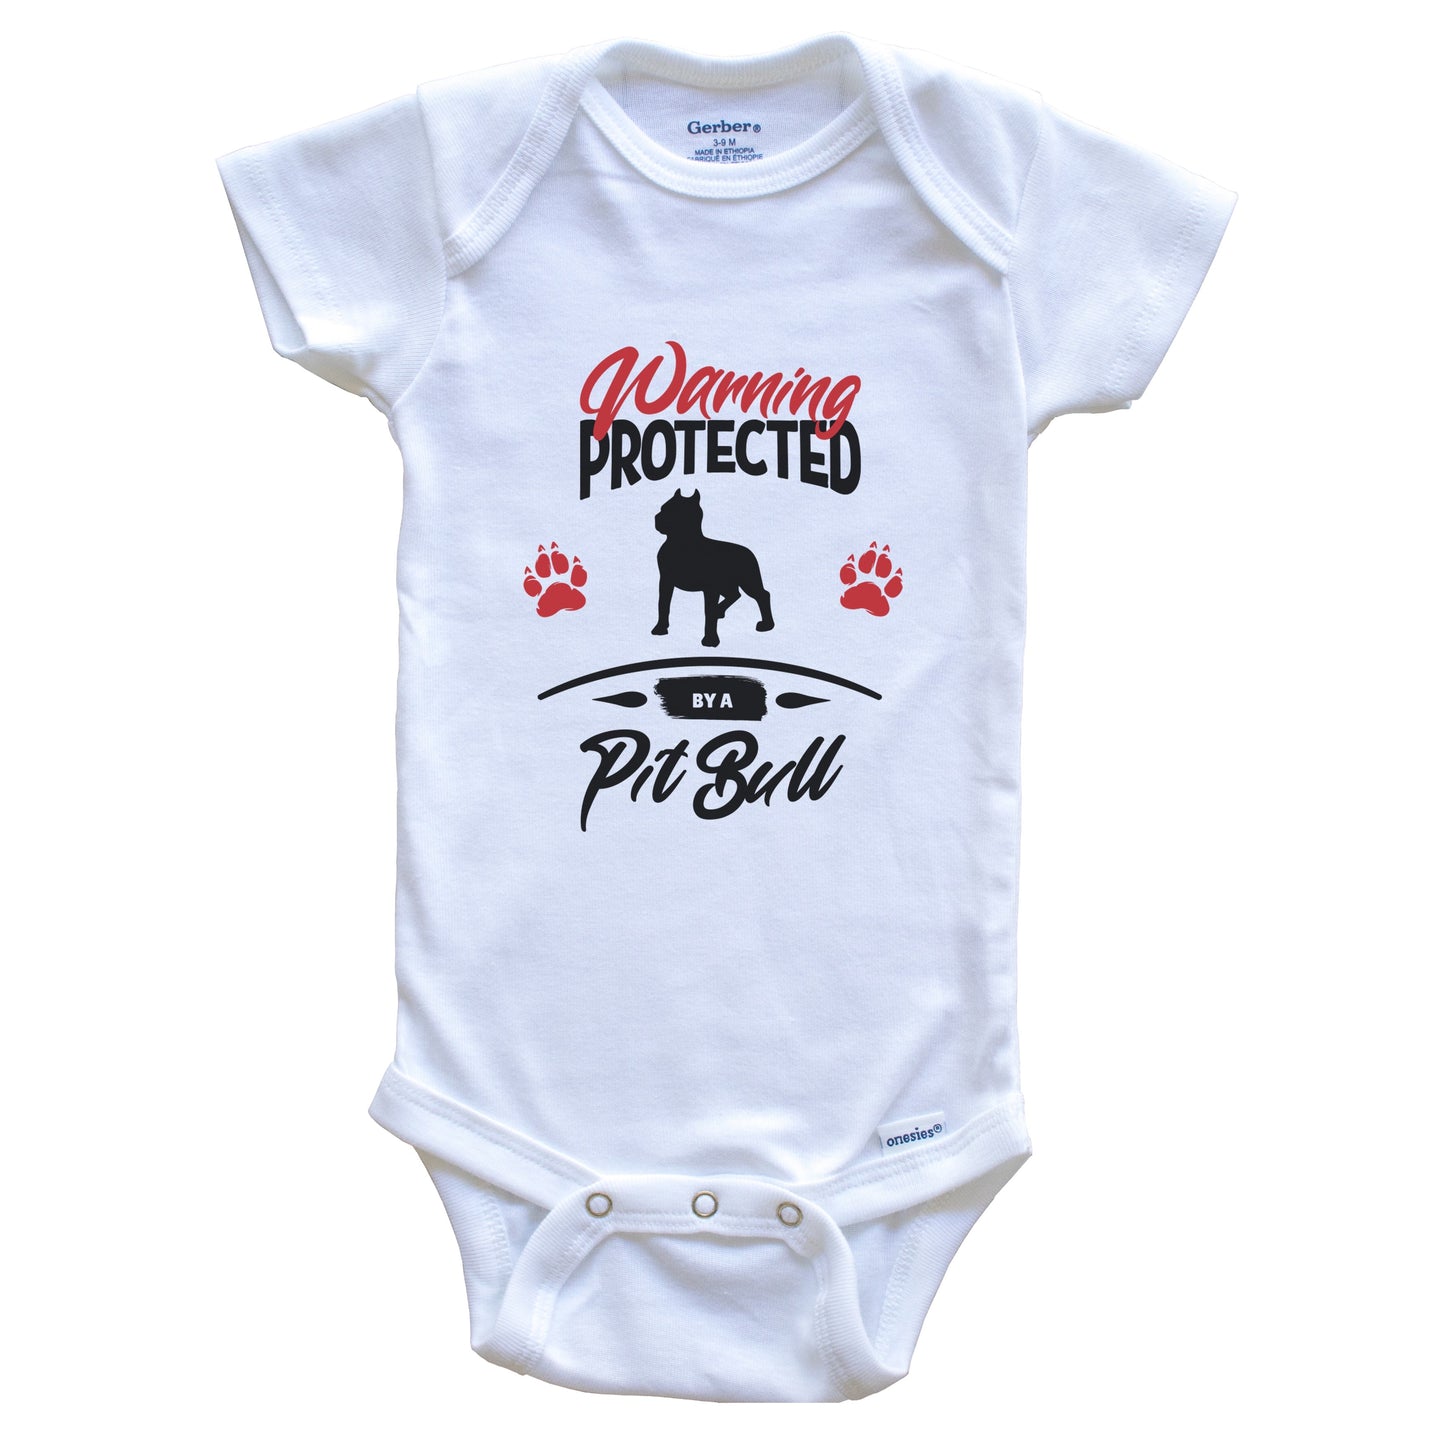 Warning Protected By A Pit Bull Funny Dog Owner Baby Bodysuit